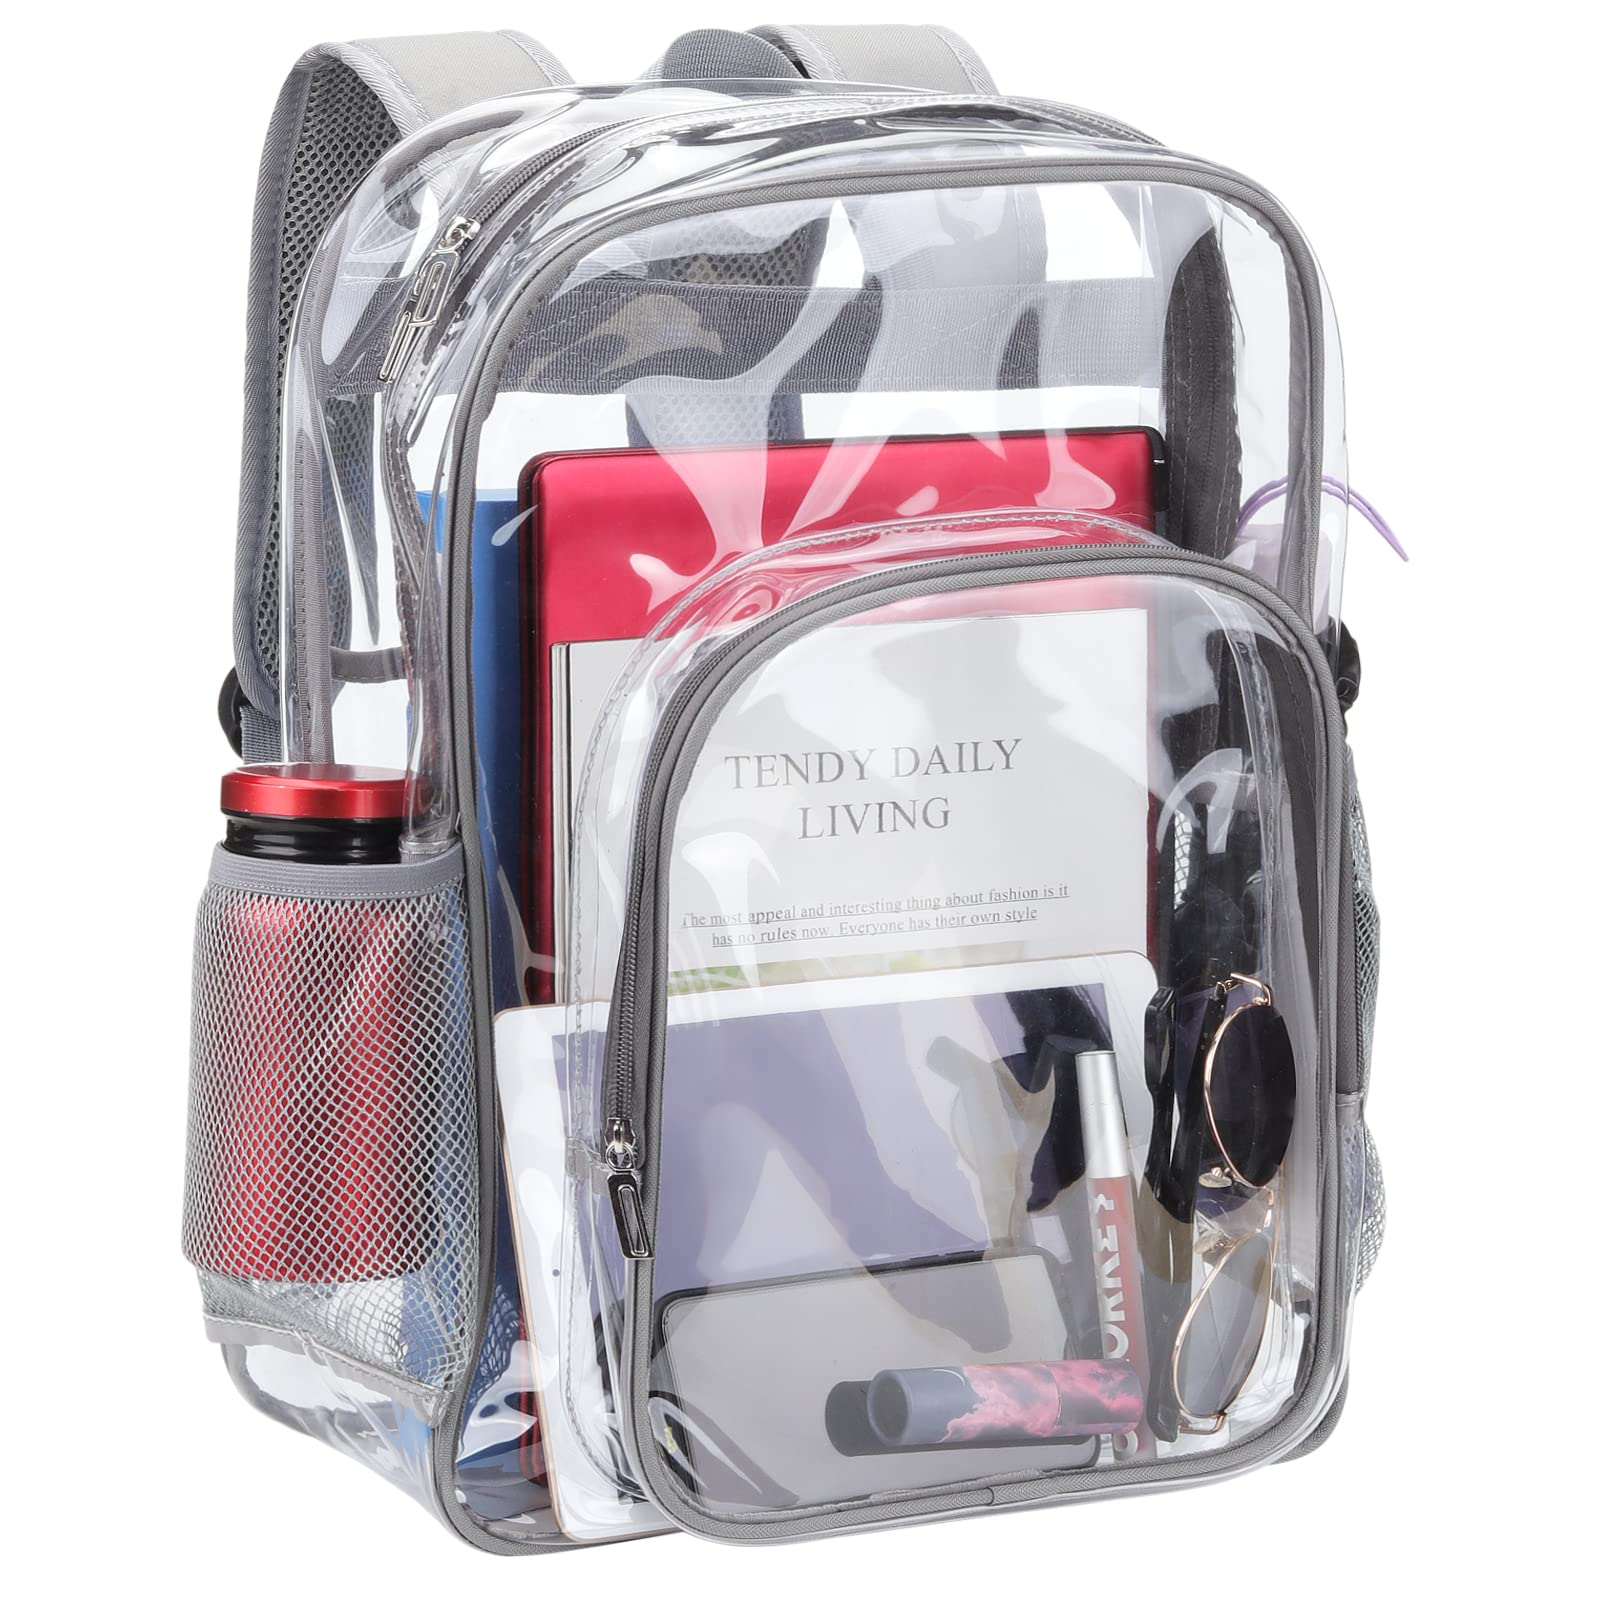 Nausear Clear Backpack Heavy Duty Large PVC Transparent Backpack See Through Backpack for Sports, Work, Stadium, Security, Trave